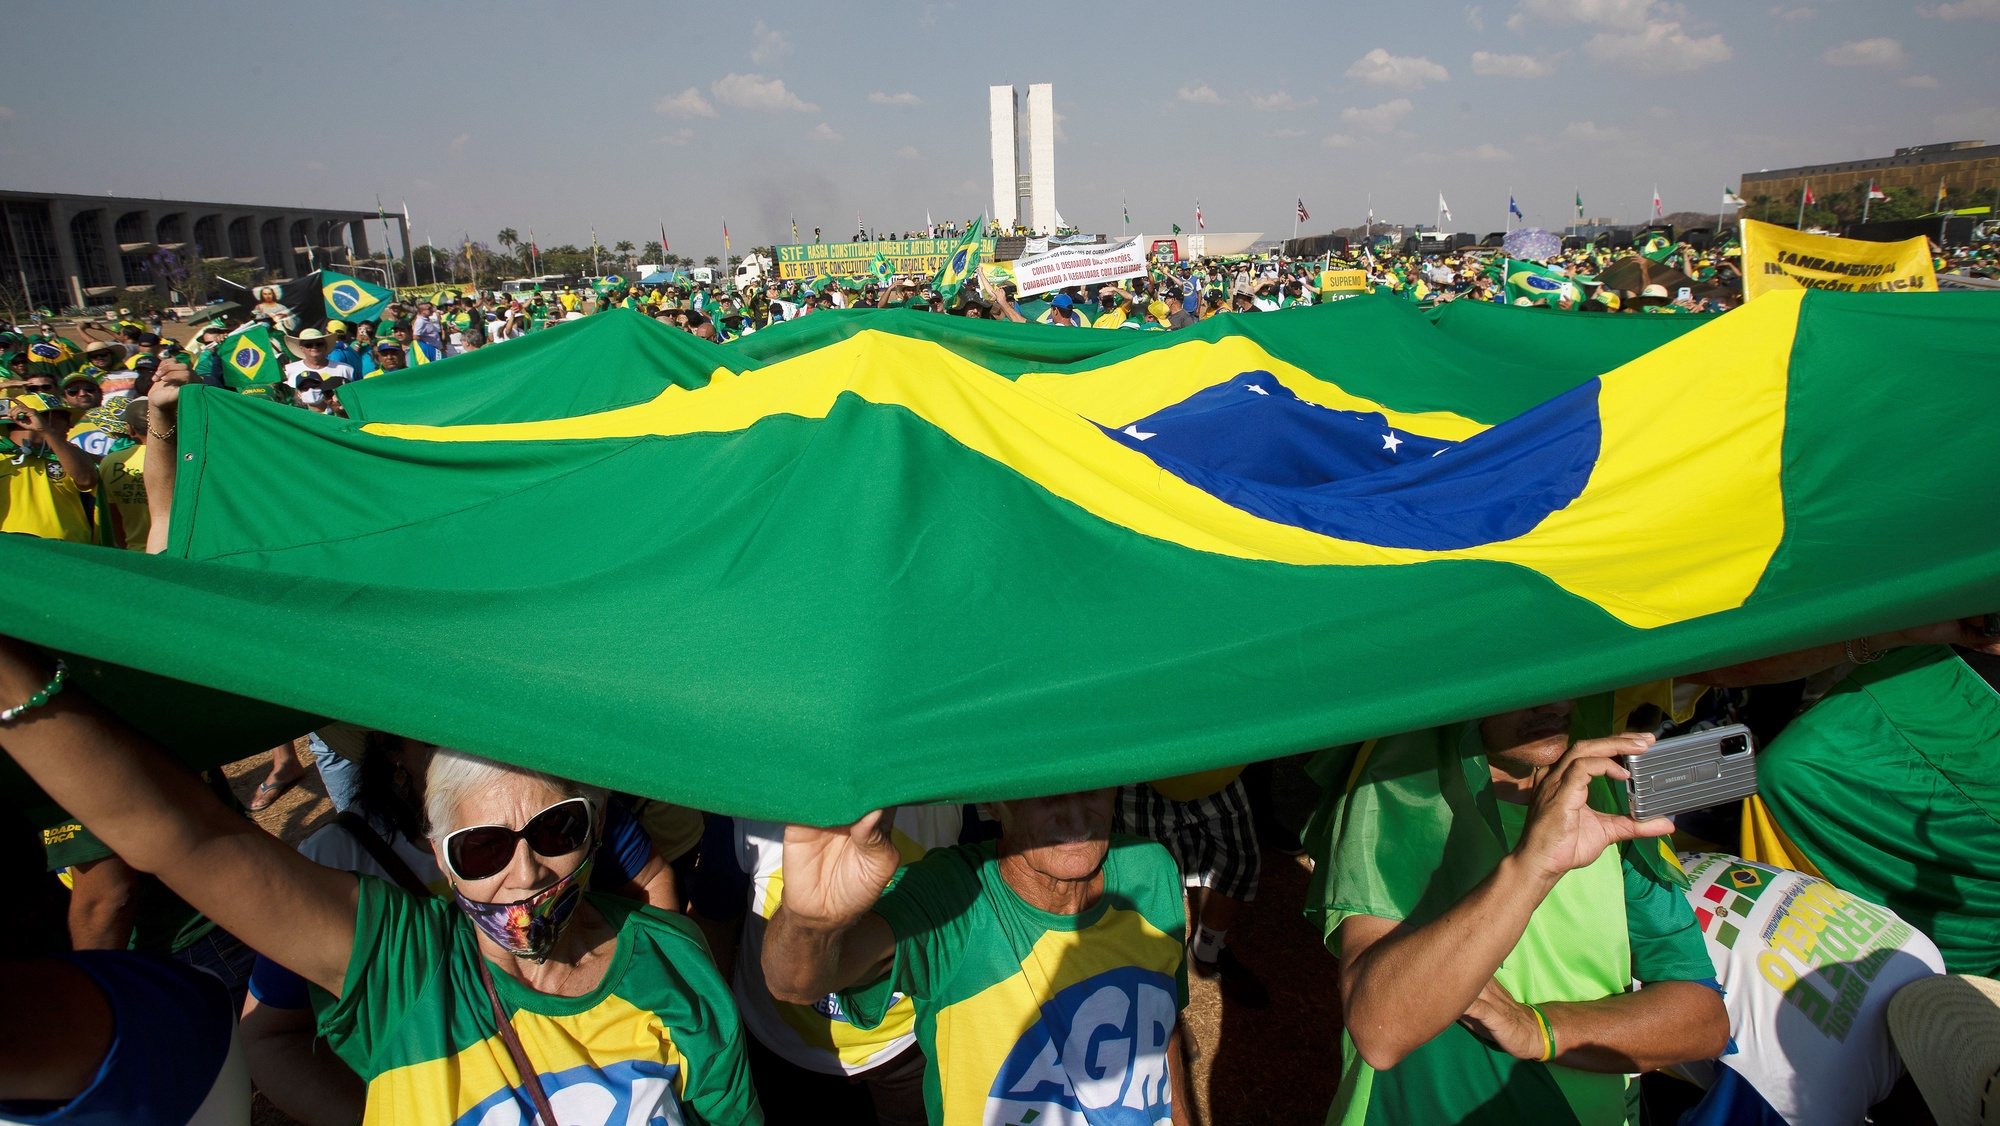 epa09456115 Supporters of the President of Brazil, Jair Bolsonaro, remain camped to protest in support of the Government, at the Esplanade of the Ministries in Brasilia, Brazil, 08 September 2021. Bolsonaro&#039;s followers continue in Brasilia with the massive protests that took place in several cities of the country a day earlier, promoted by the President who urged those present to disobey some decisions of the Supreme Court, while part of the crowd demanded a &#039;Military intervention&#039; and the &#039;dissolution&#039; of the Parliament and the highest court. The President of the Supreme Court of Brazil, Luis Fux, warned Bolsonaro&#039;s followers that &#039;no one will close&#039; that court and said that disobedience to the court&#039;s decisions constitutes a &#039;crime&#039;.  EPA/Joedson Alves